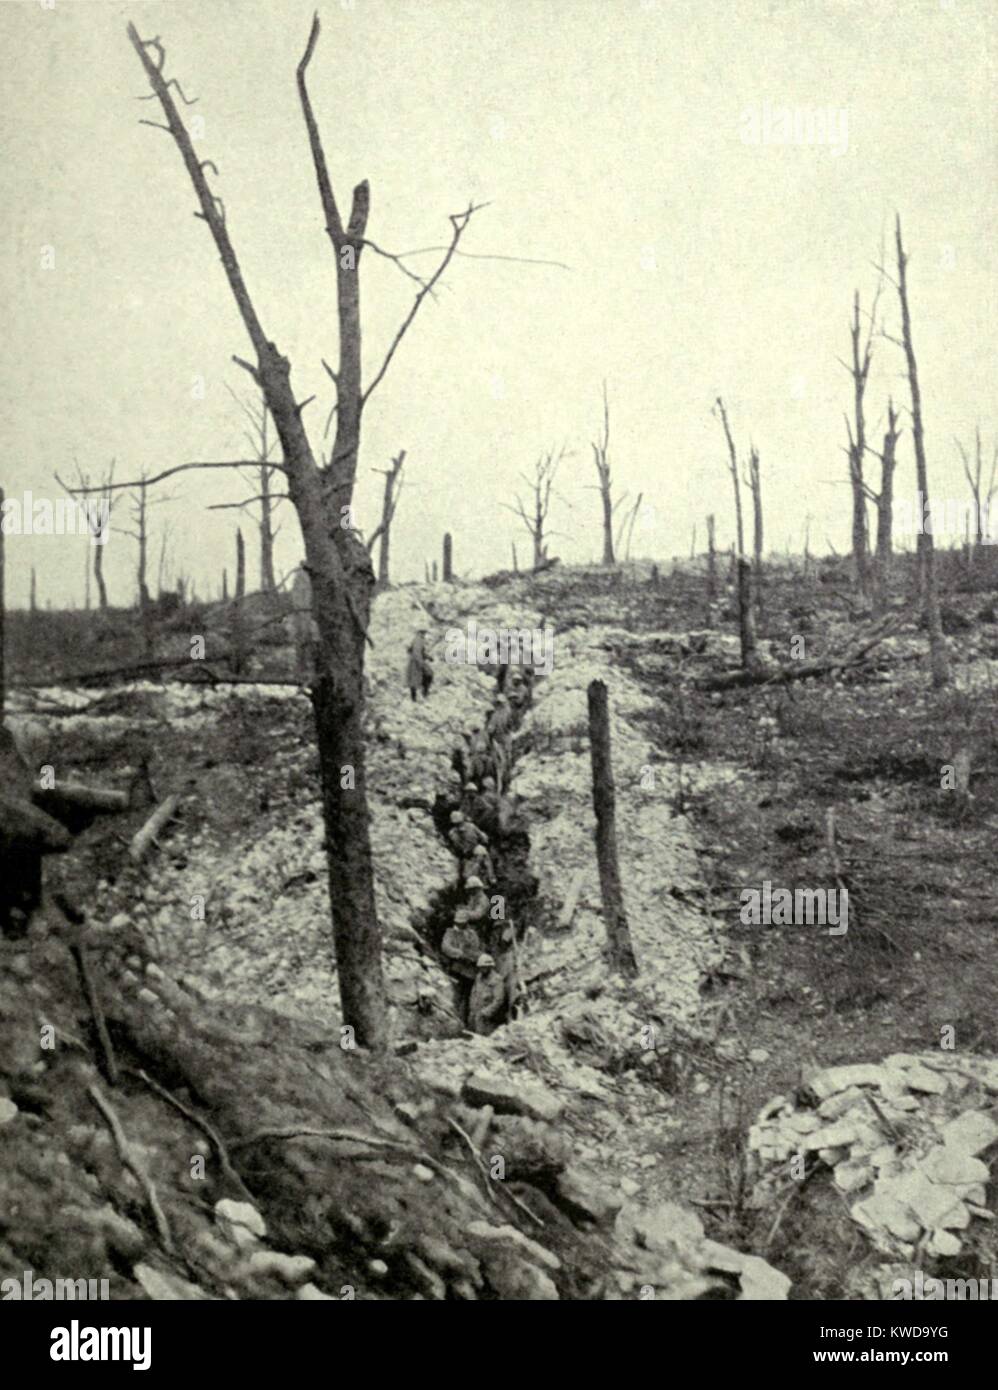 World War 1: Battle of Verdun. Entrenched French troops of the Mangin Division in the recaptured but blasted Caillette Wood. June 1916. (BSLOC 2013 1 103) Stock Photo